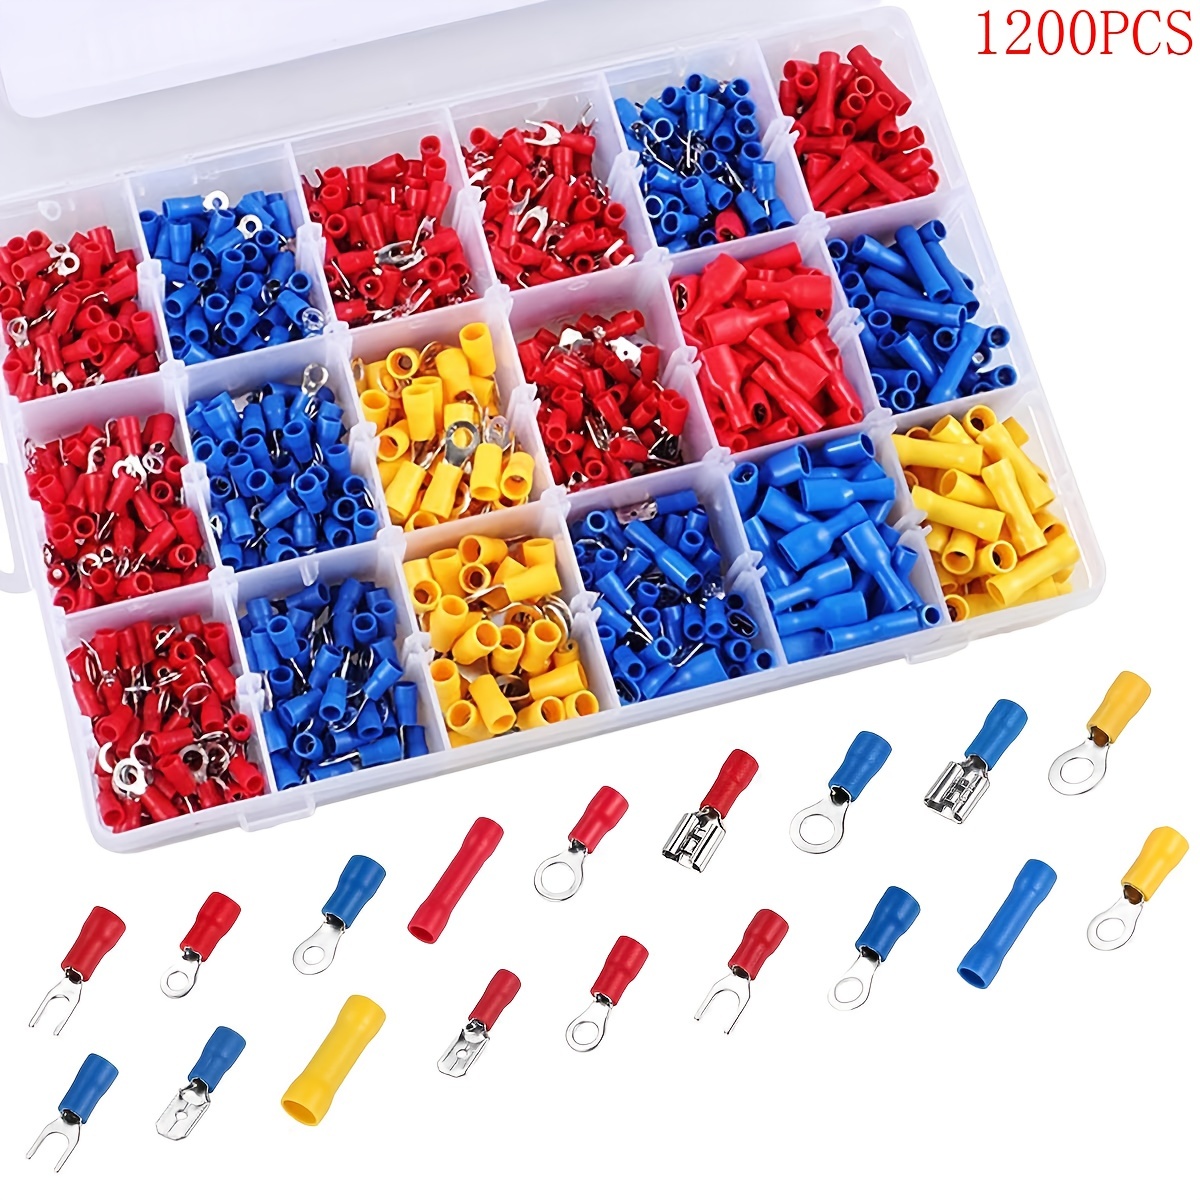  1200PCS Electrical Connector Kit-Sopoby Automotive Insulated  CrimpTerminals Connectors for Wiring Mixed Ring Fork Spade Butt Connector  Set : Industrial & Scientific